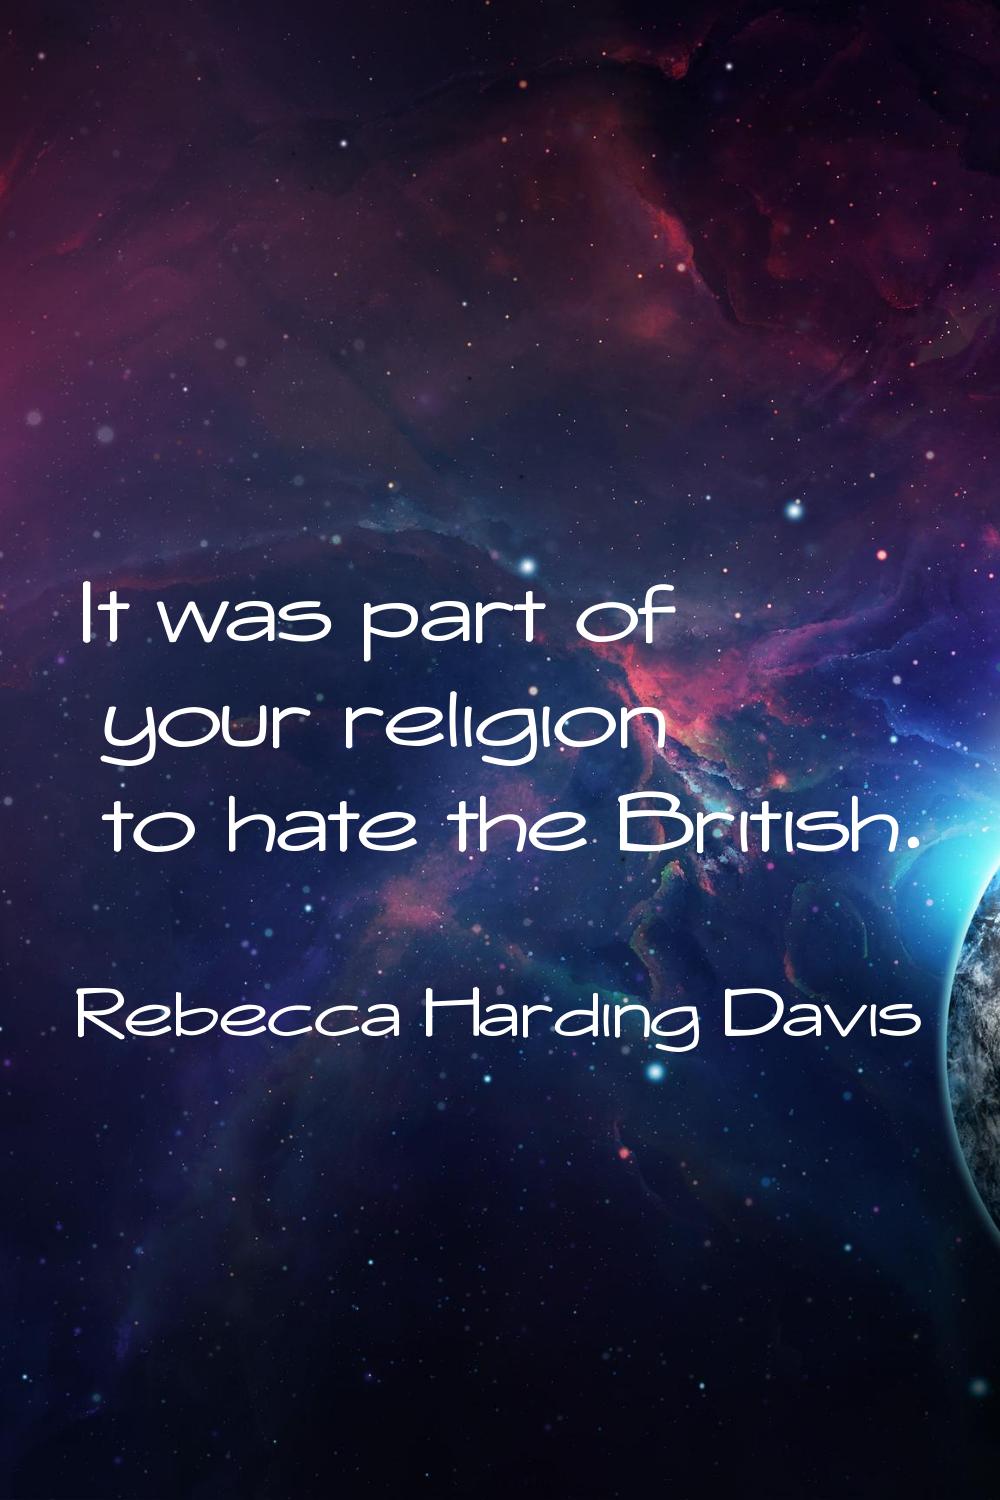 It was part of your religion to hate the British.